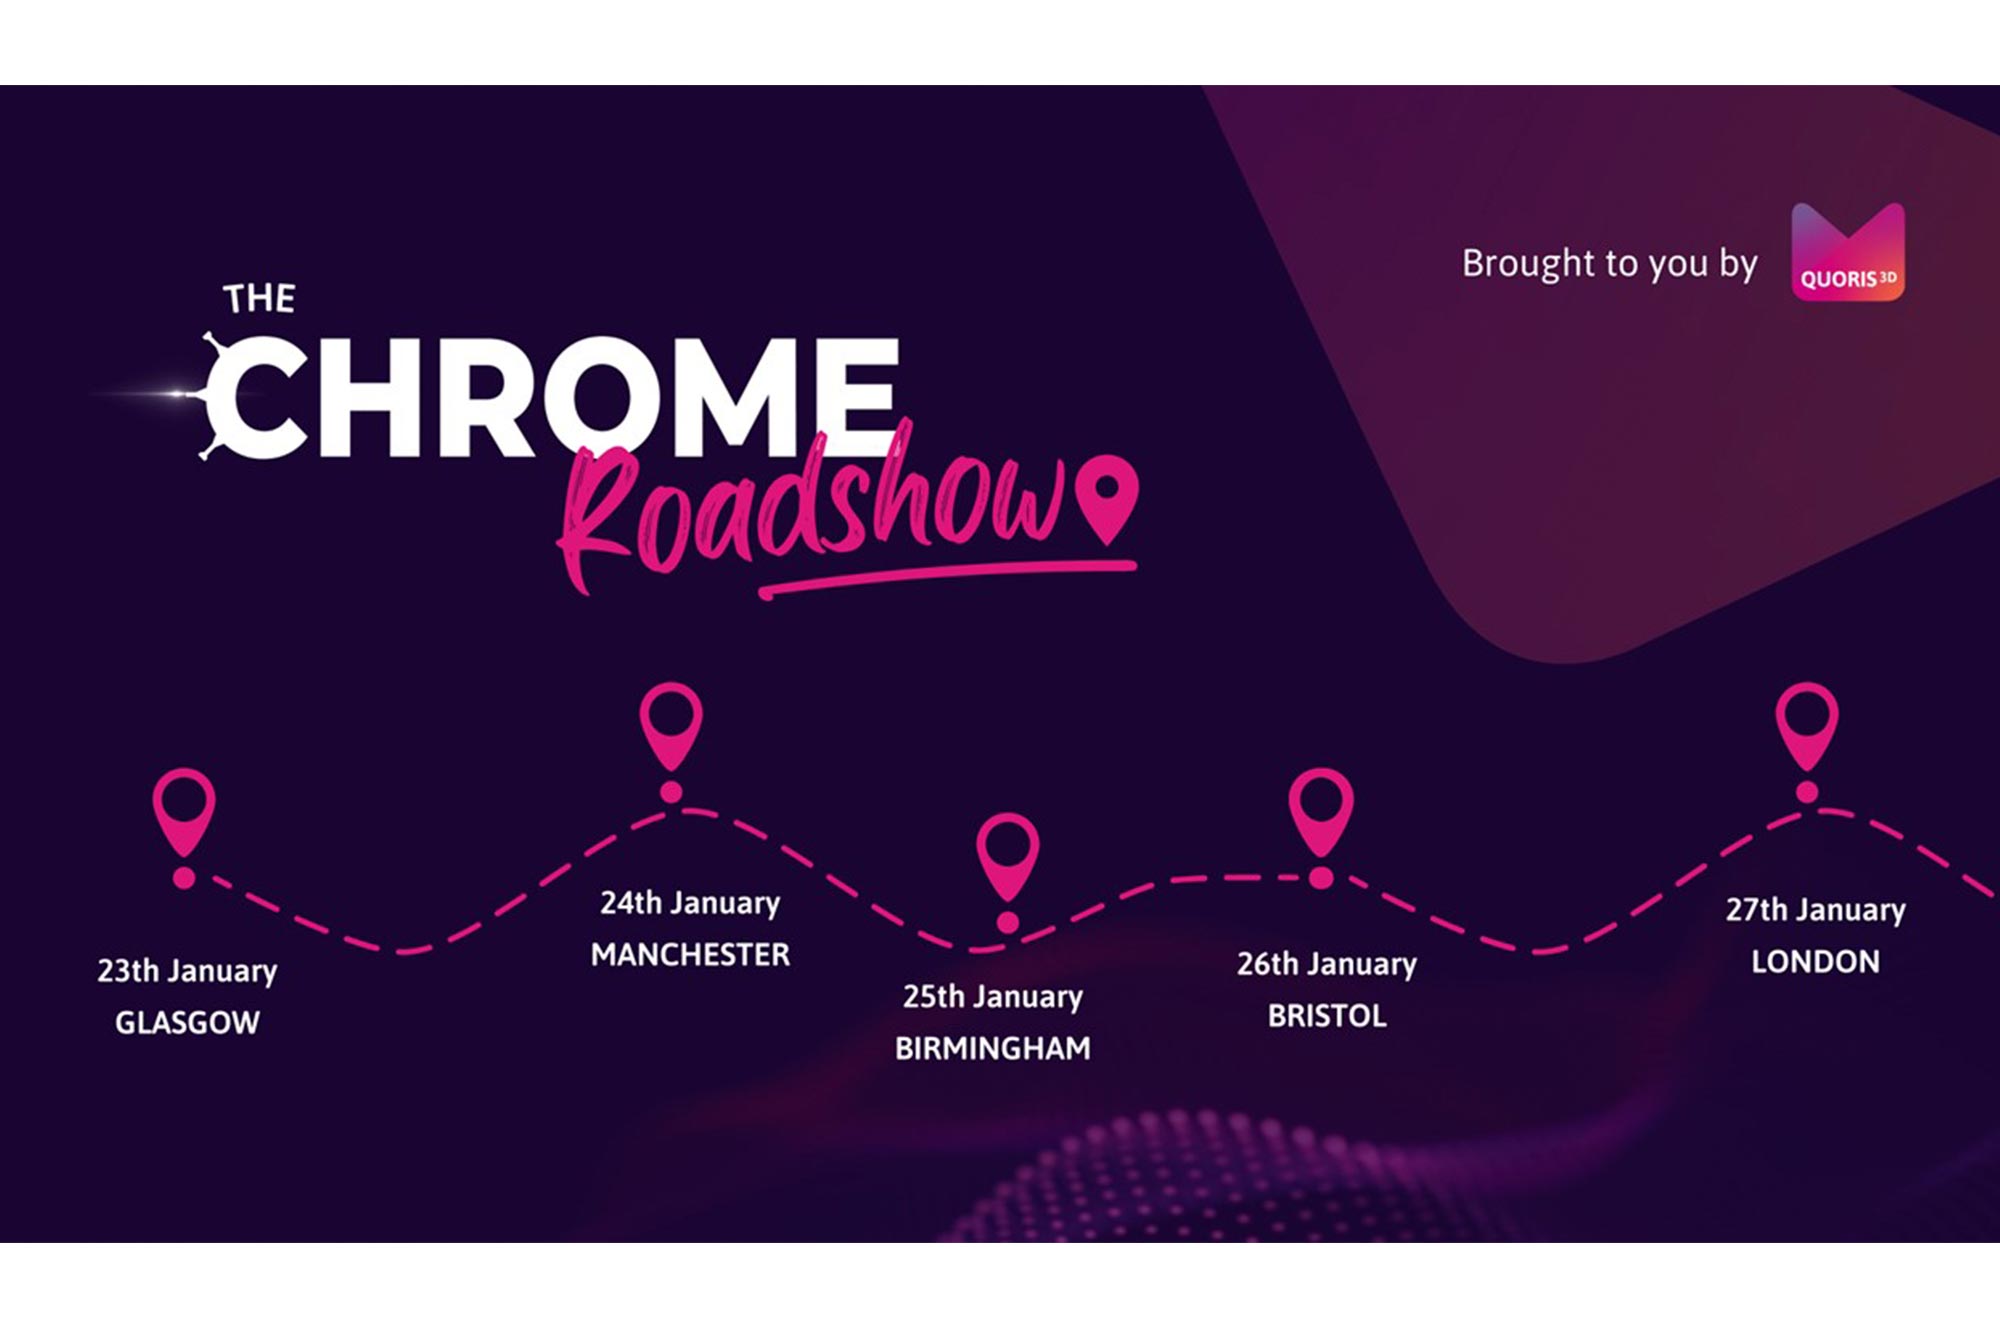 Chrome Roadshow begins its journey to a town near you!